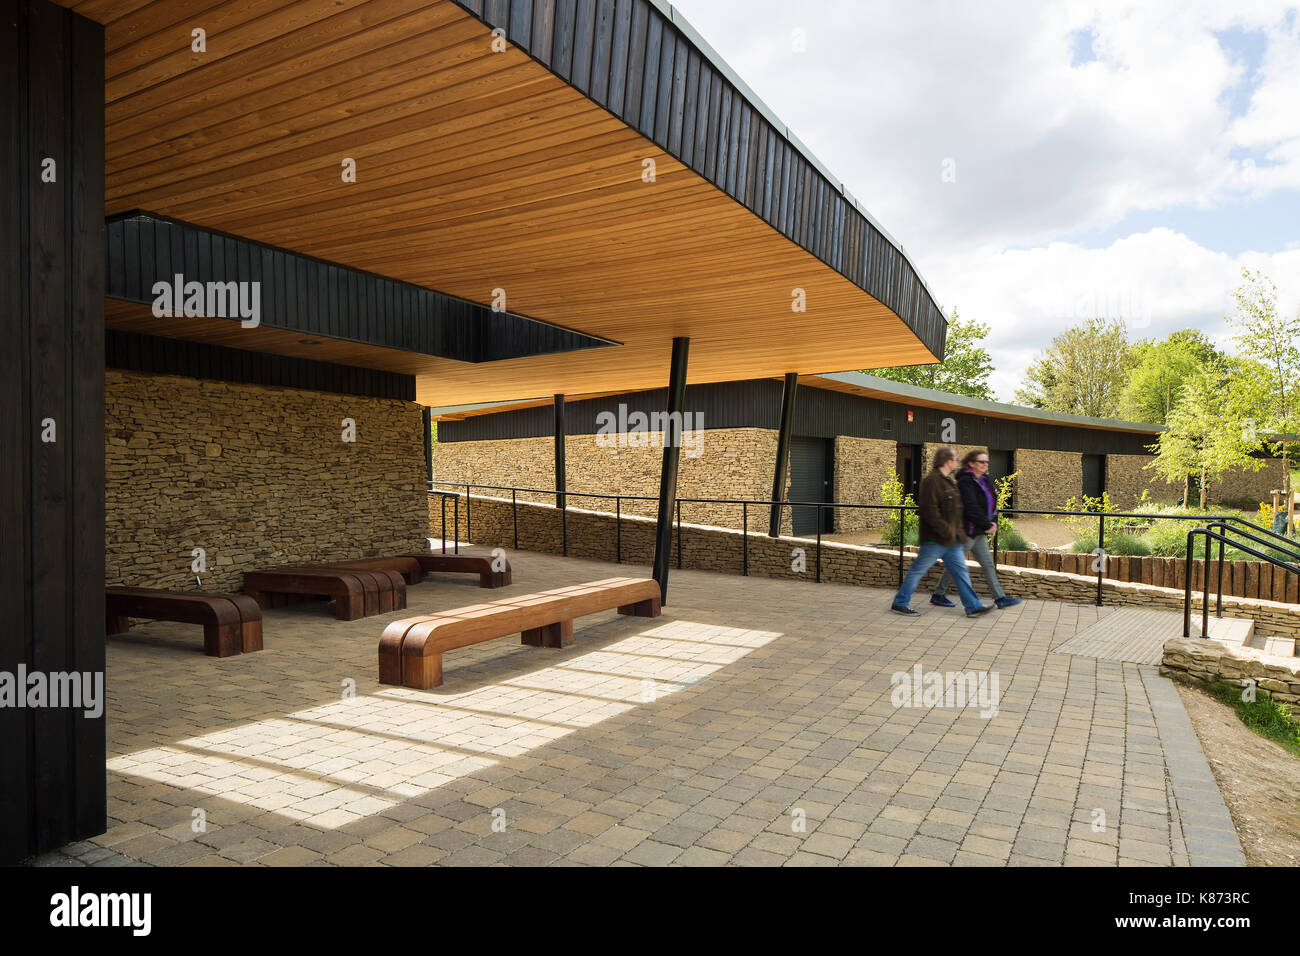 View of exterior space of main pavilion. Lakeside Centre, Eastleigh, United Kingdom. Architect: R H Partnership Architects Ltd, 2017. Stock Photo